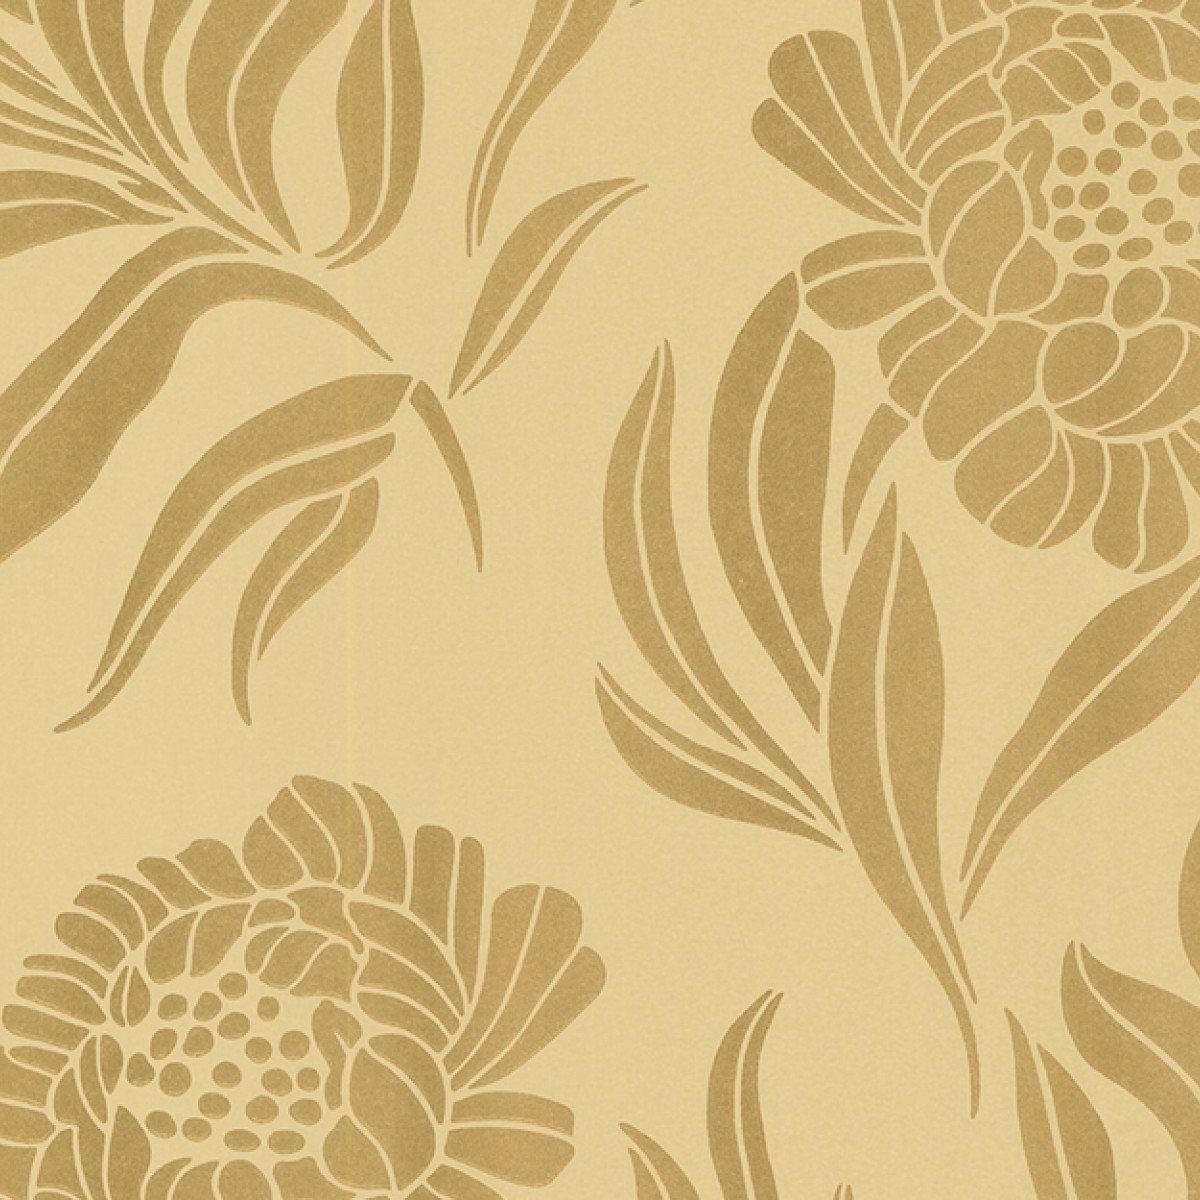 Tapet Chatsworth, Gold Luxury Floral, 1838 Wallcoverings, 5.3mp / rola, Tapet living 